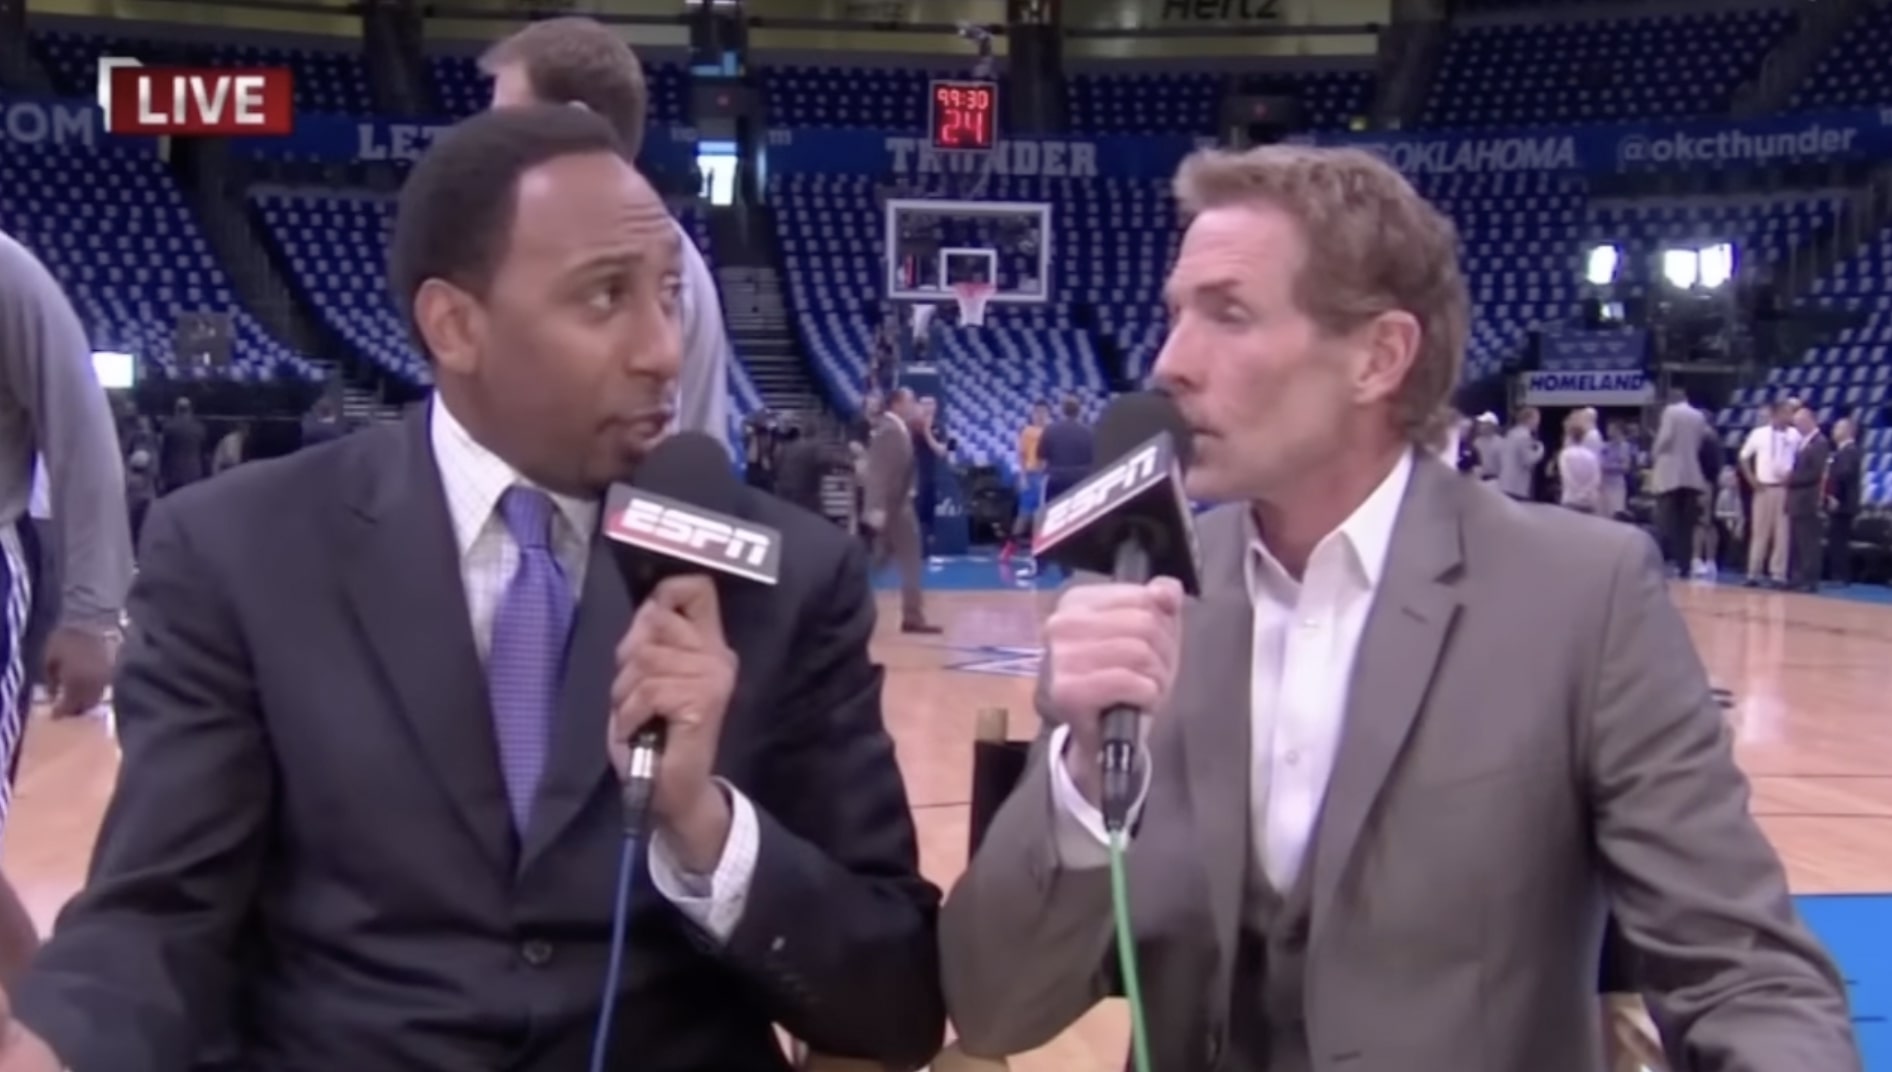 Skip Bayless and Stephen A. Smith